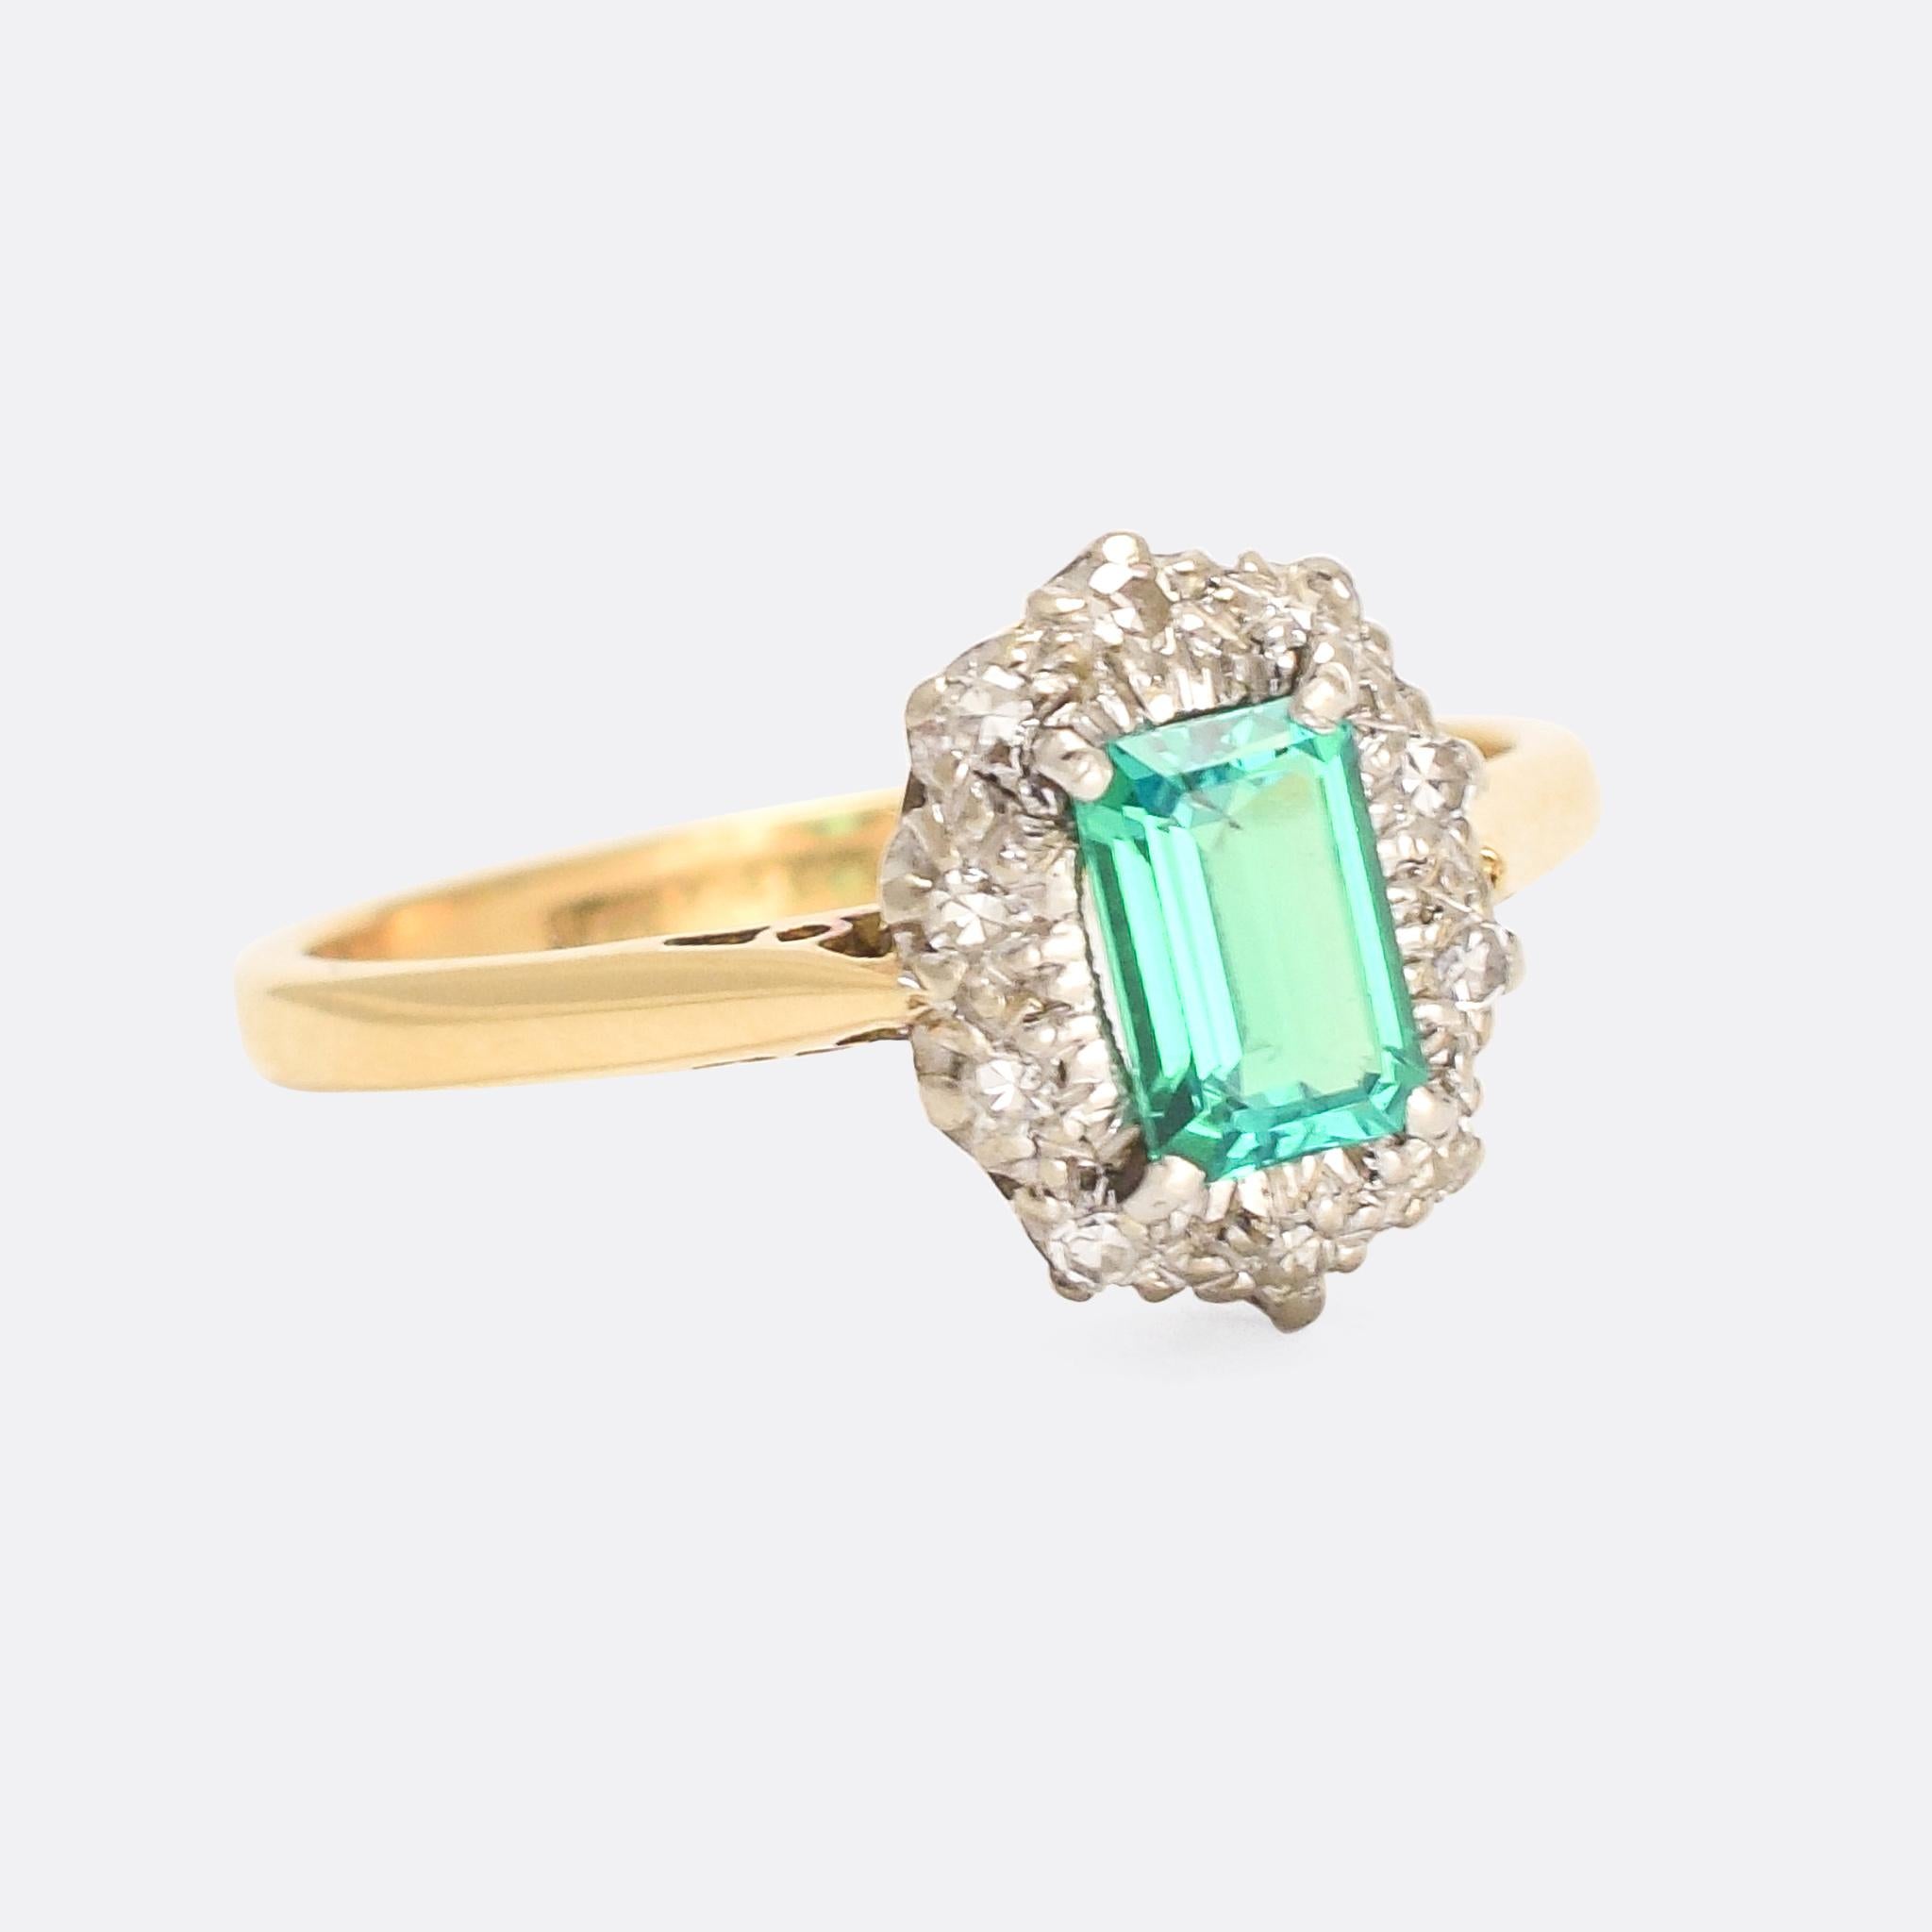 A stunning Edwardian emerald and diamond cluster ring dating from the early 20th Century, circa 1910. The principal stone is a vibrant (likely Colombian origin) elongated emerald cut emerald, perfectly accented with icy white diamonds and platinum